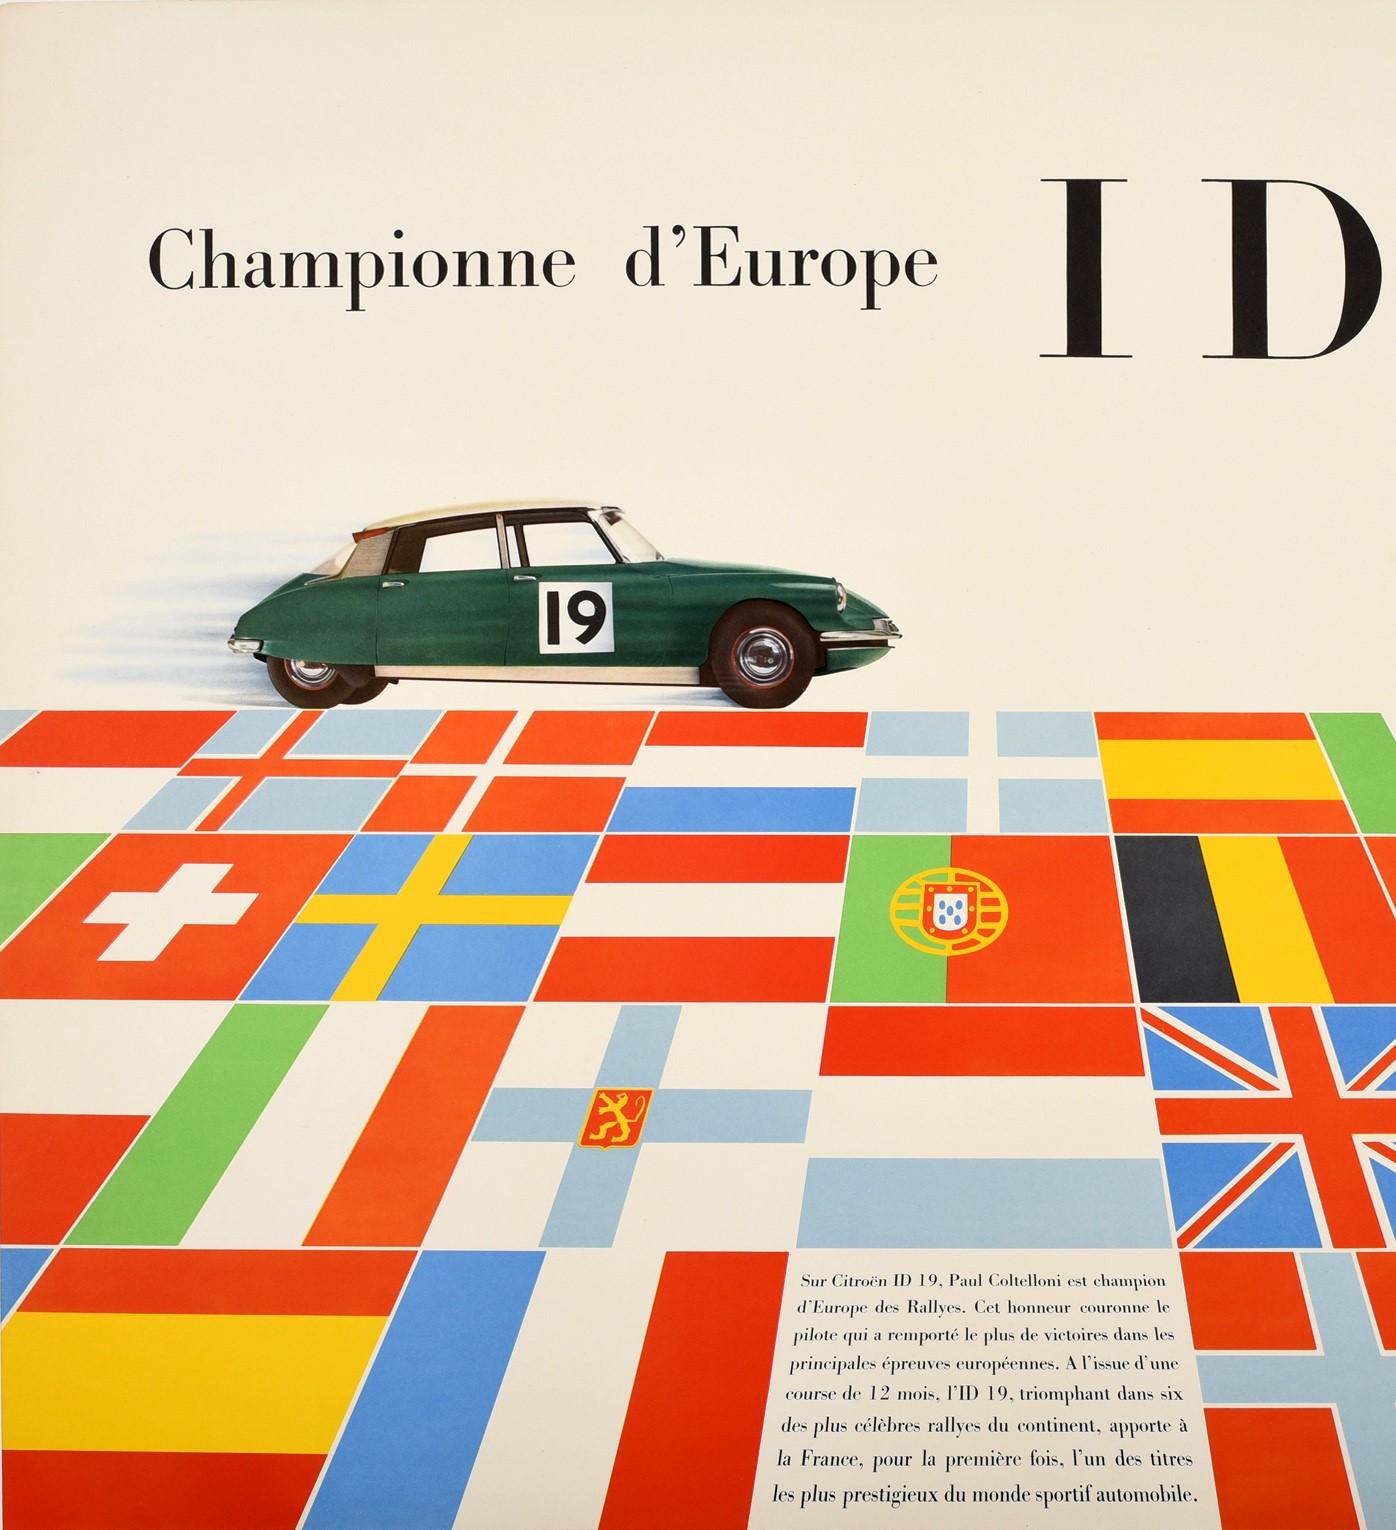 Original vintage sport poster issued by the car manufacturer Citroen for the Championne d'Europe ID19 / Champion of Europe ID19 featuring a colorful image of a Classic Citroen ID 19 racing car zooming over various European flags with the title above